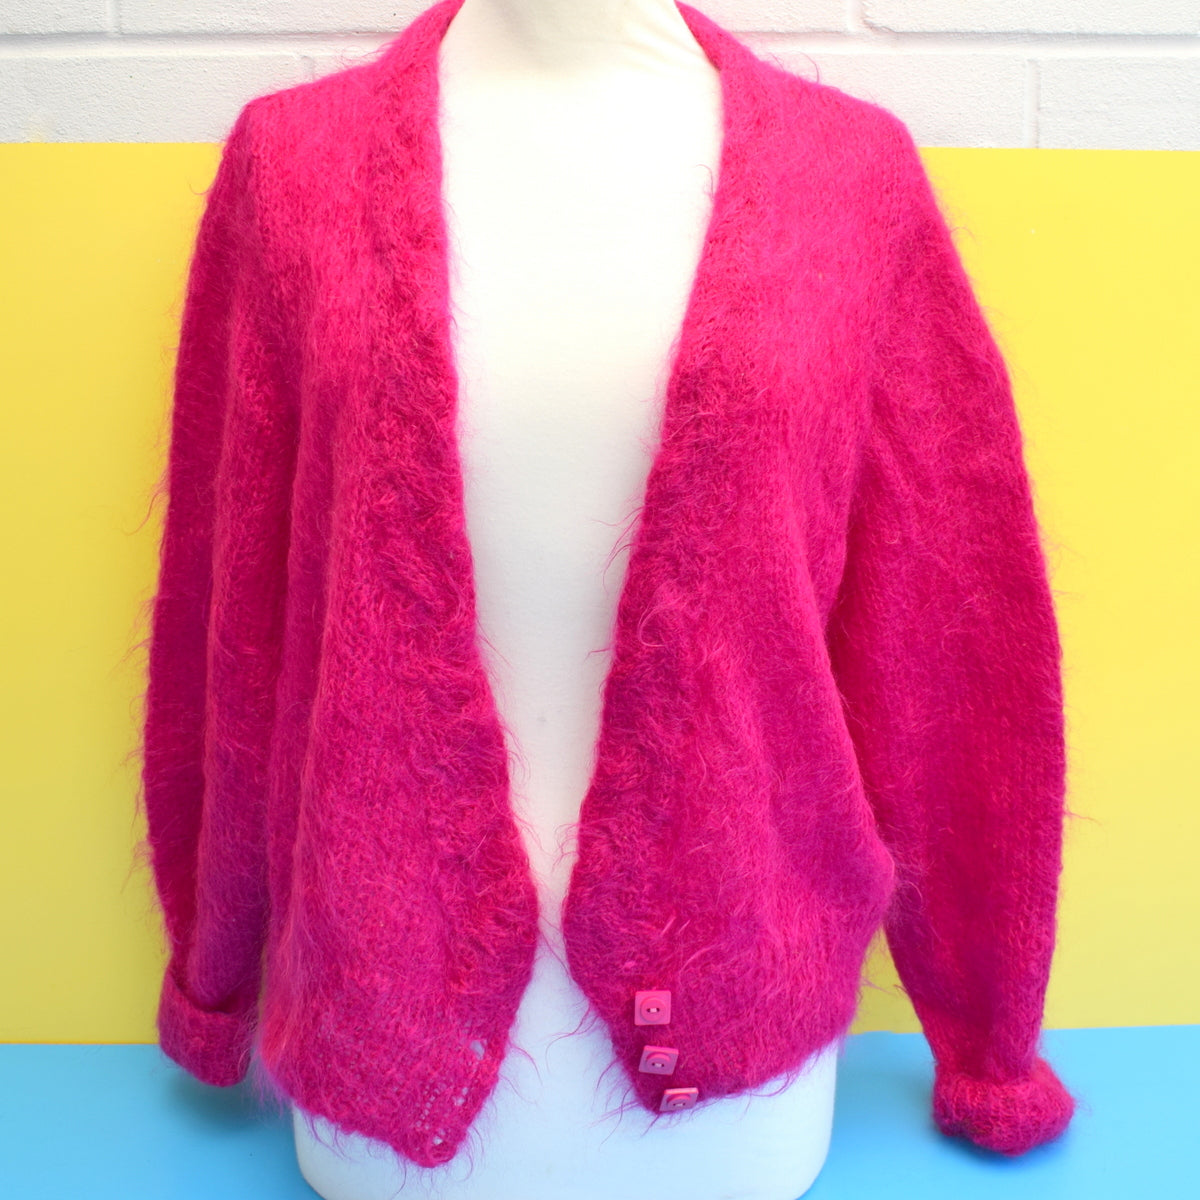 Vintage 1980s Mohair Fluffy Cardigan - One Size - Hot Pink